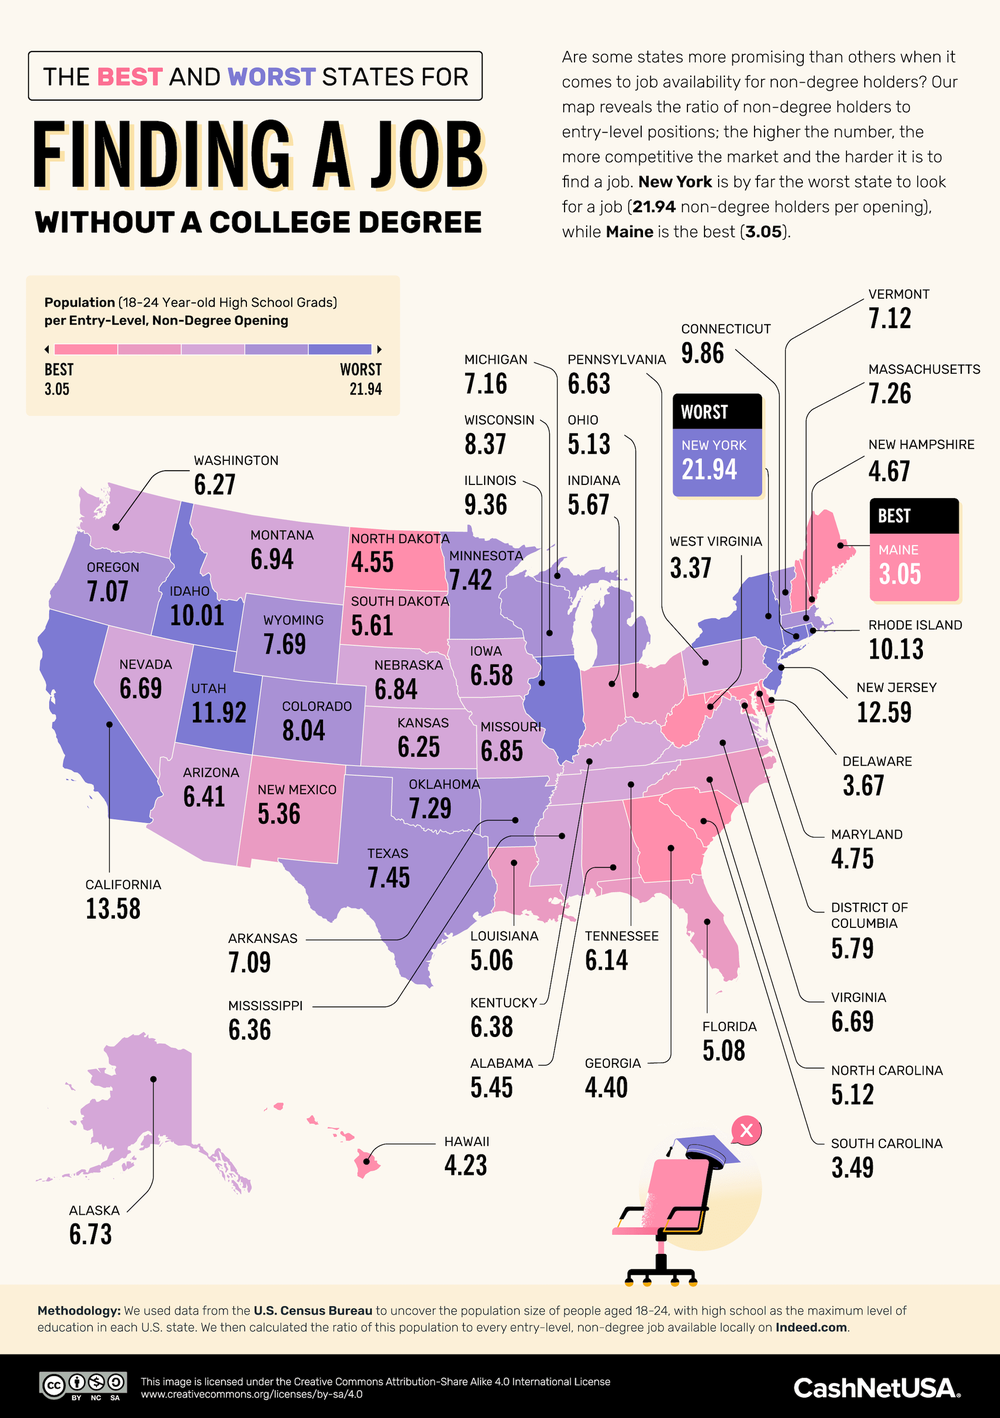 fewer young men are going to college — here's a state-by-state breakdown of where they'll have the best and worst job prospects